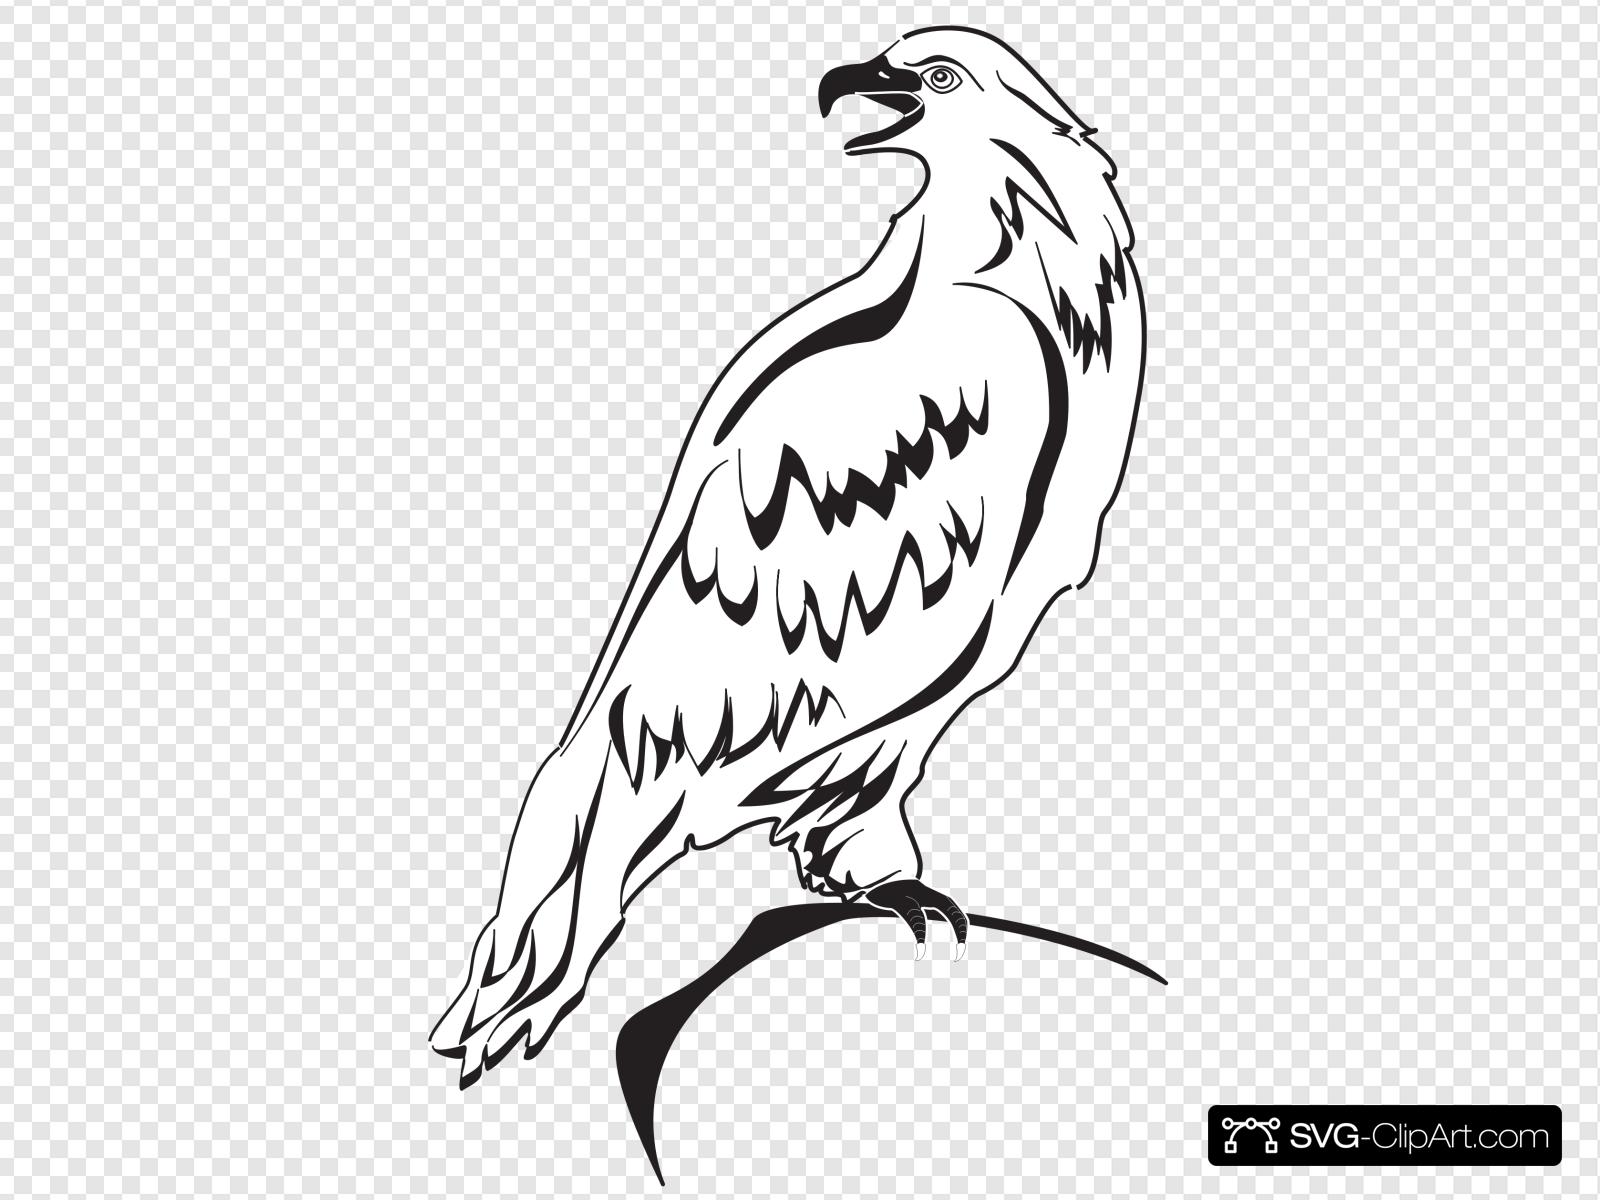 Perched Eagle Outline Clip art, Icon and SVG.